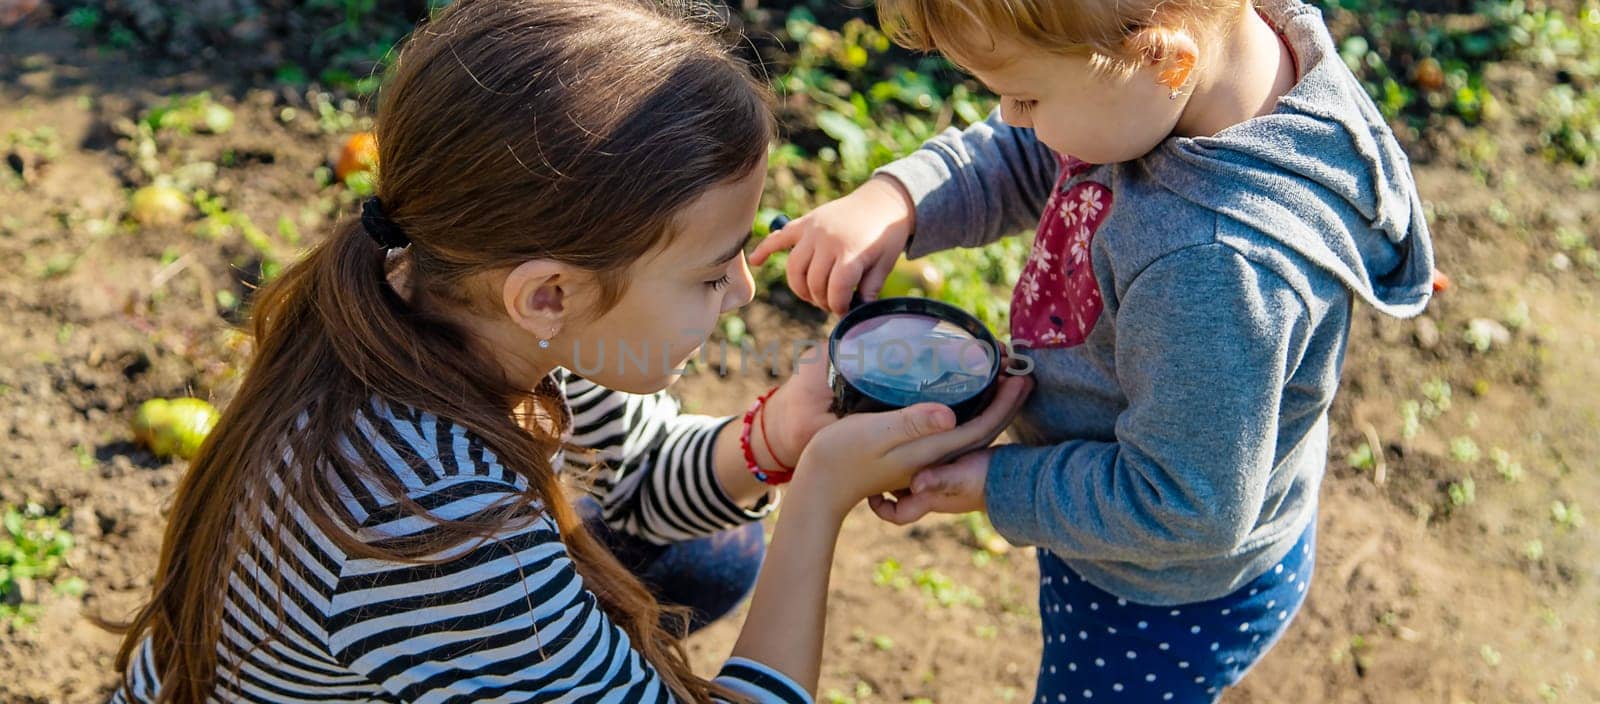 Children examine the soil with a magnifying glass. Selective focus. Kid.